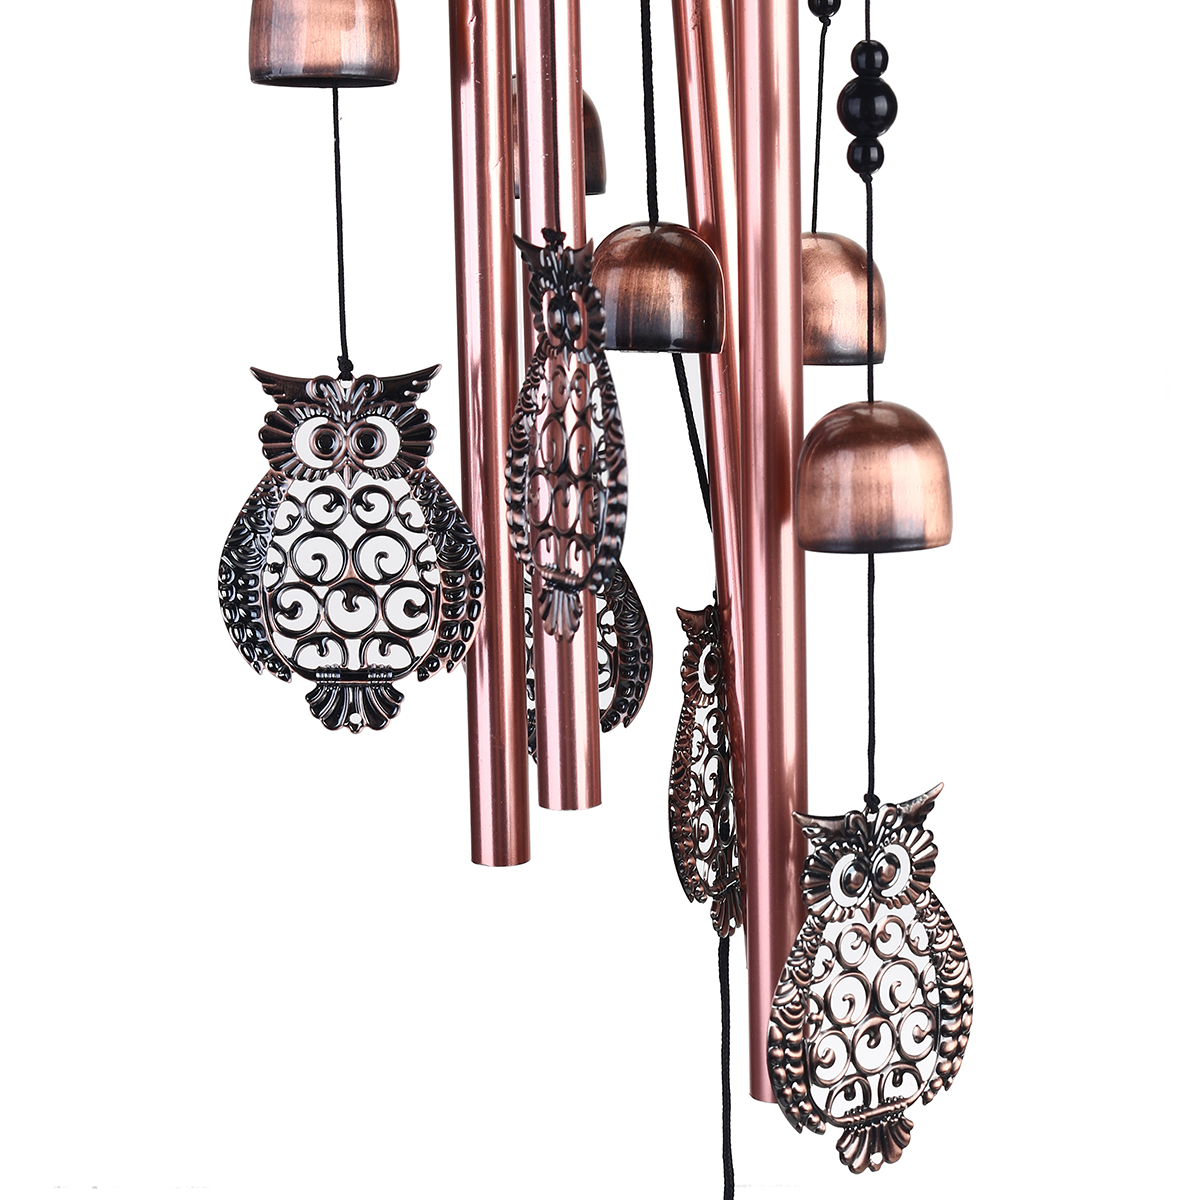 Brass-Bell-Wind-Chime-Ornaments-European-And-American-Garden-Home-Decoration-1777951-10